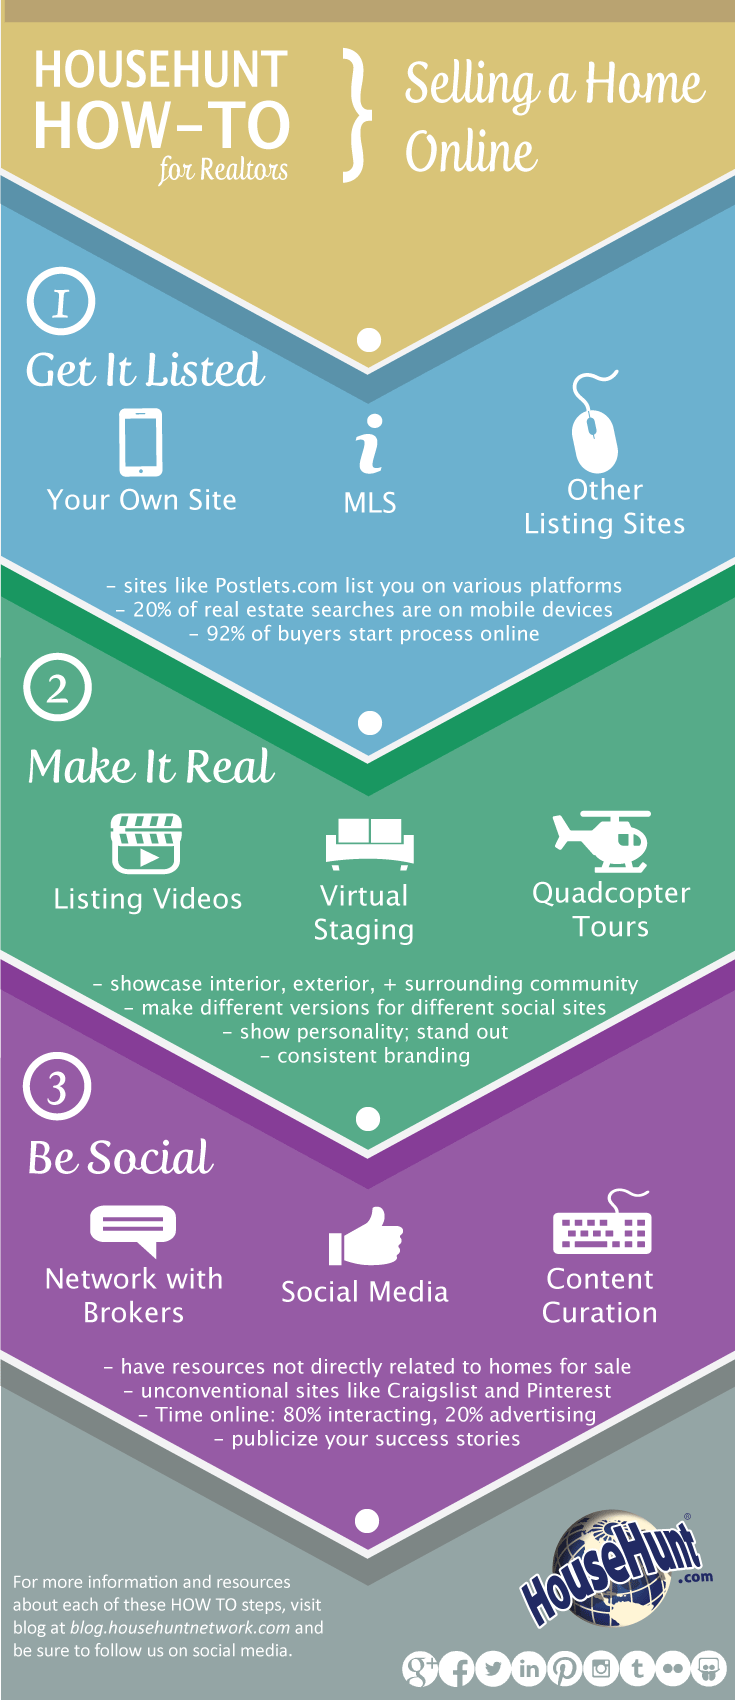 how-to-sell-a-home-online_1700